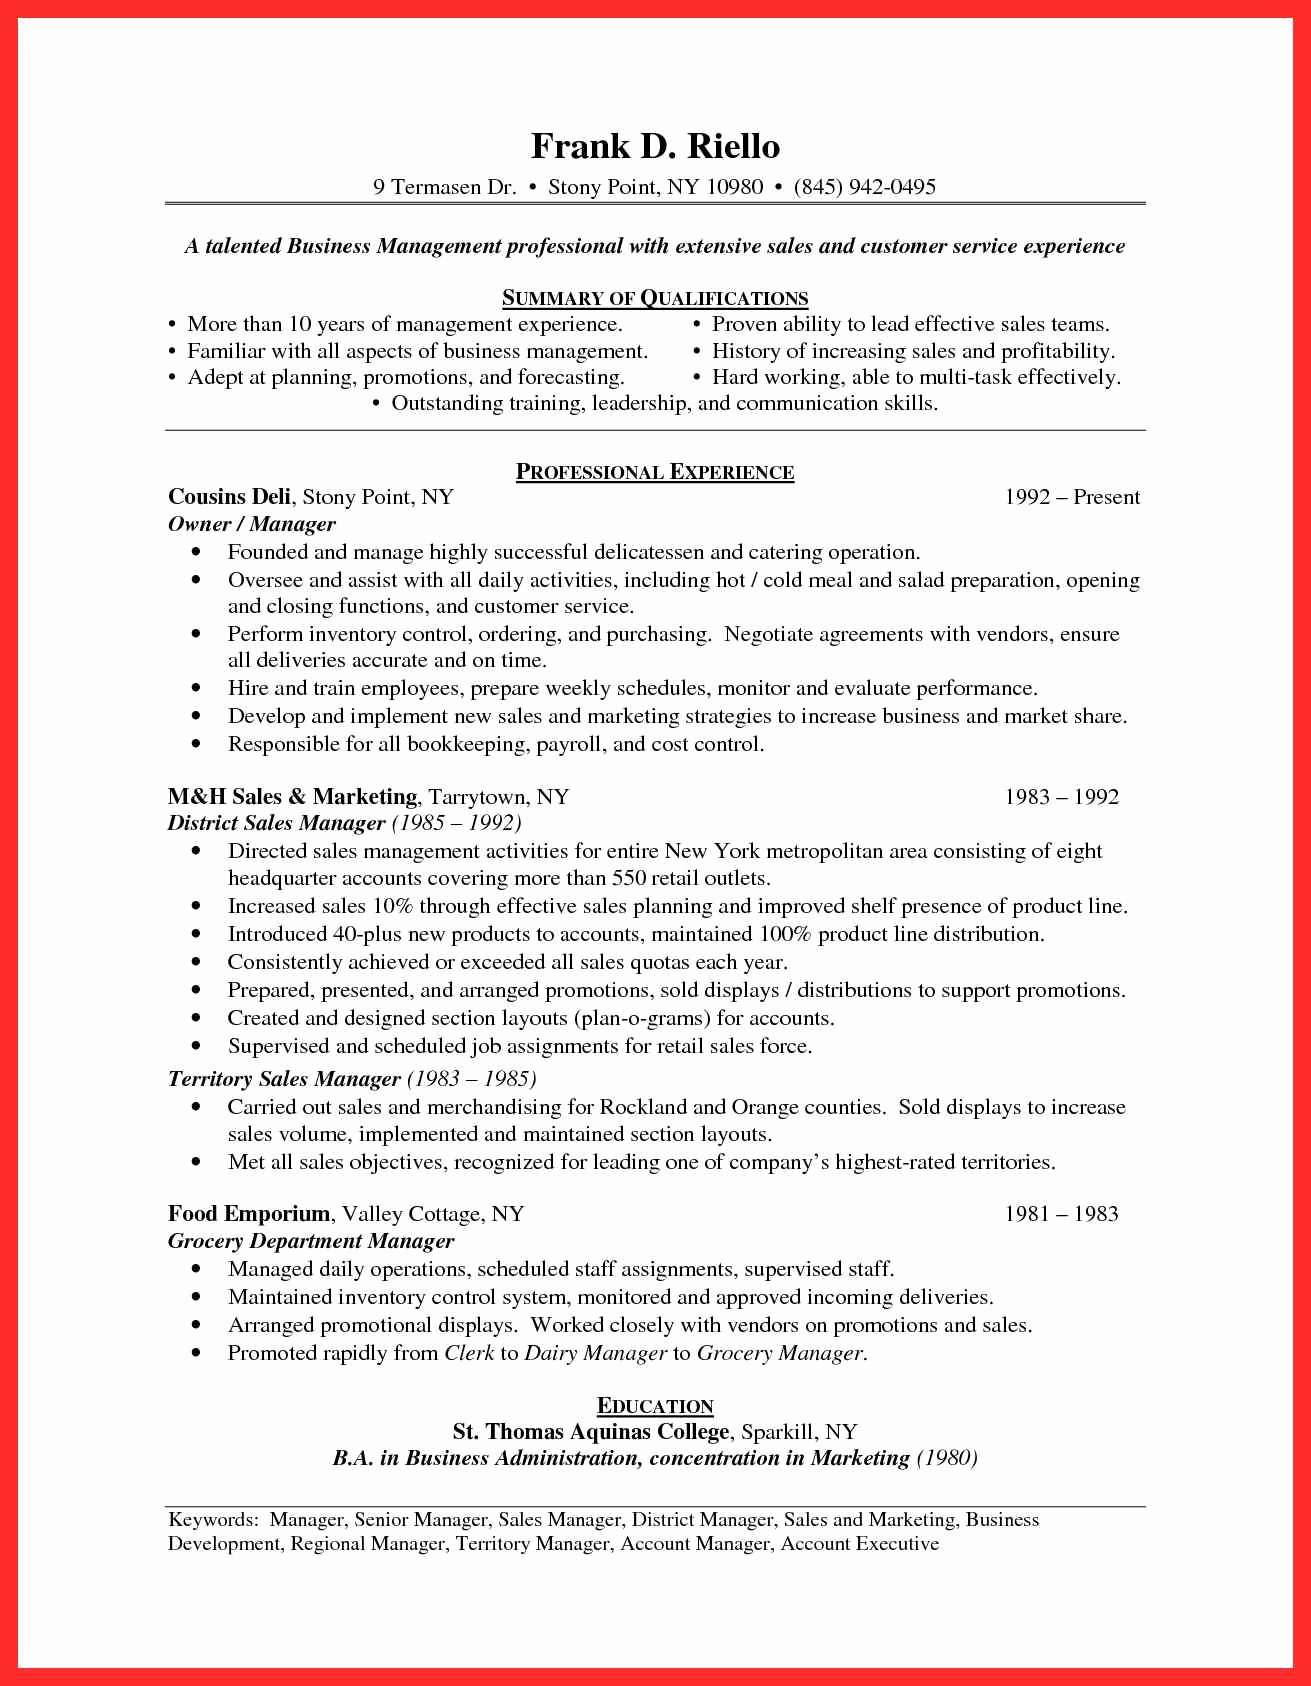 Resume Samples for Teachers with No Experience Pdf Resume